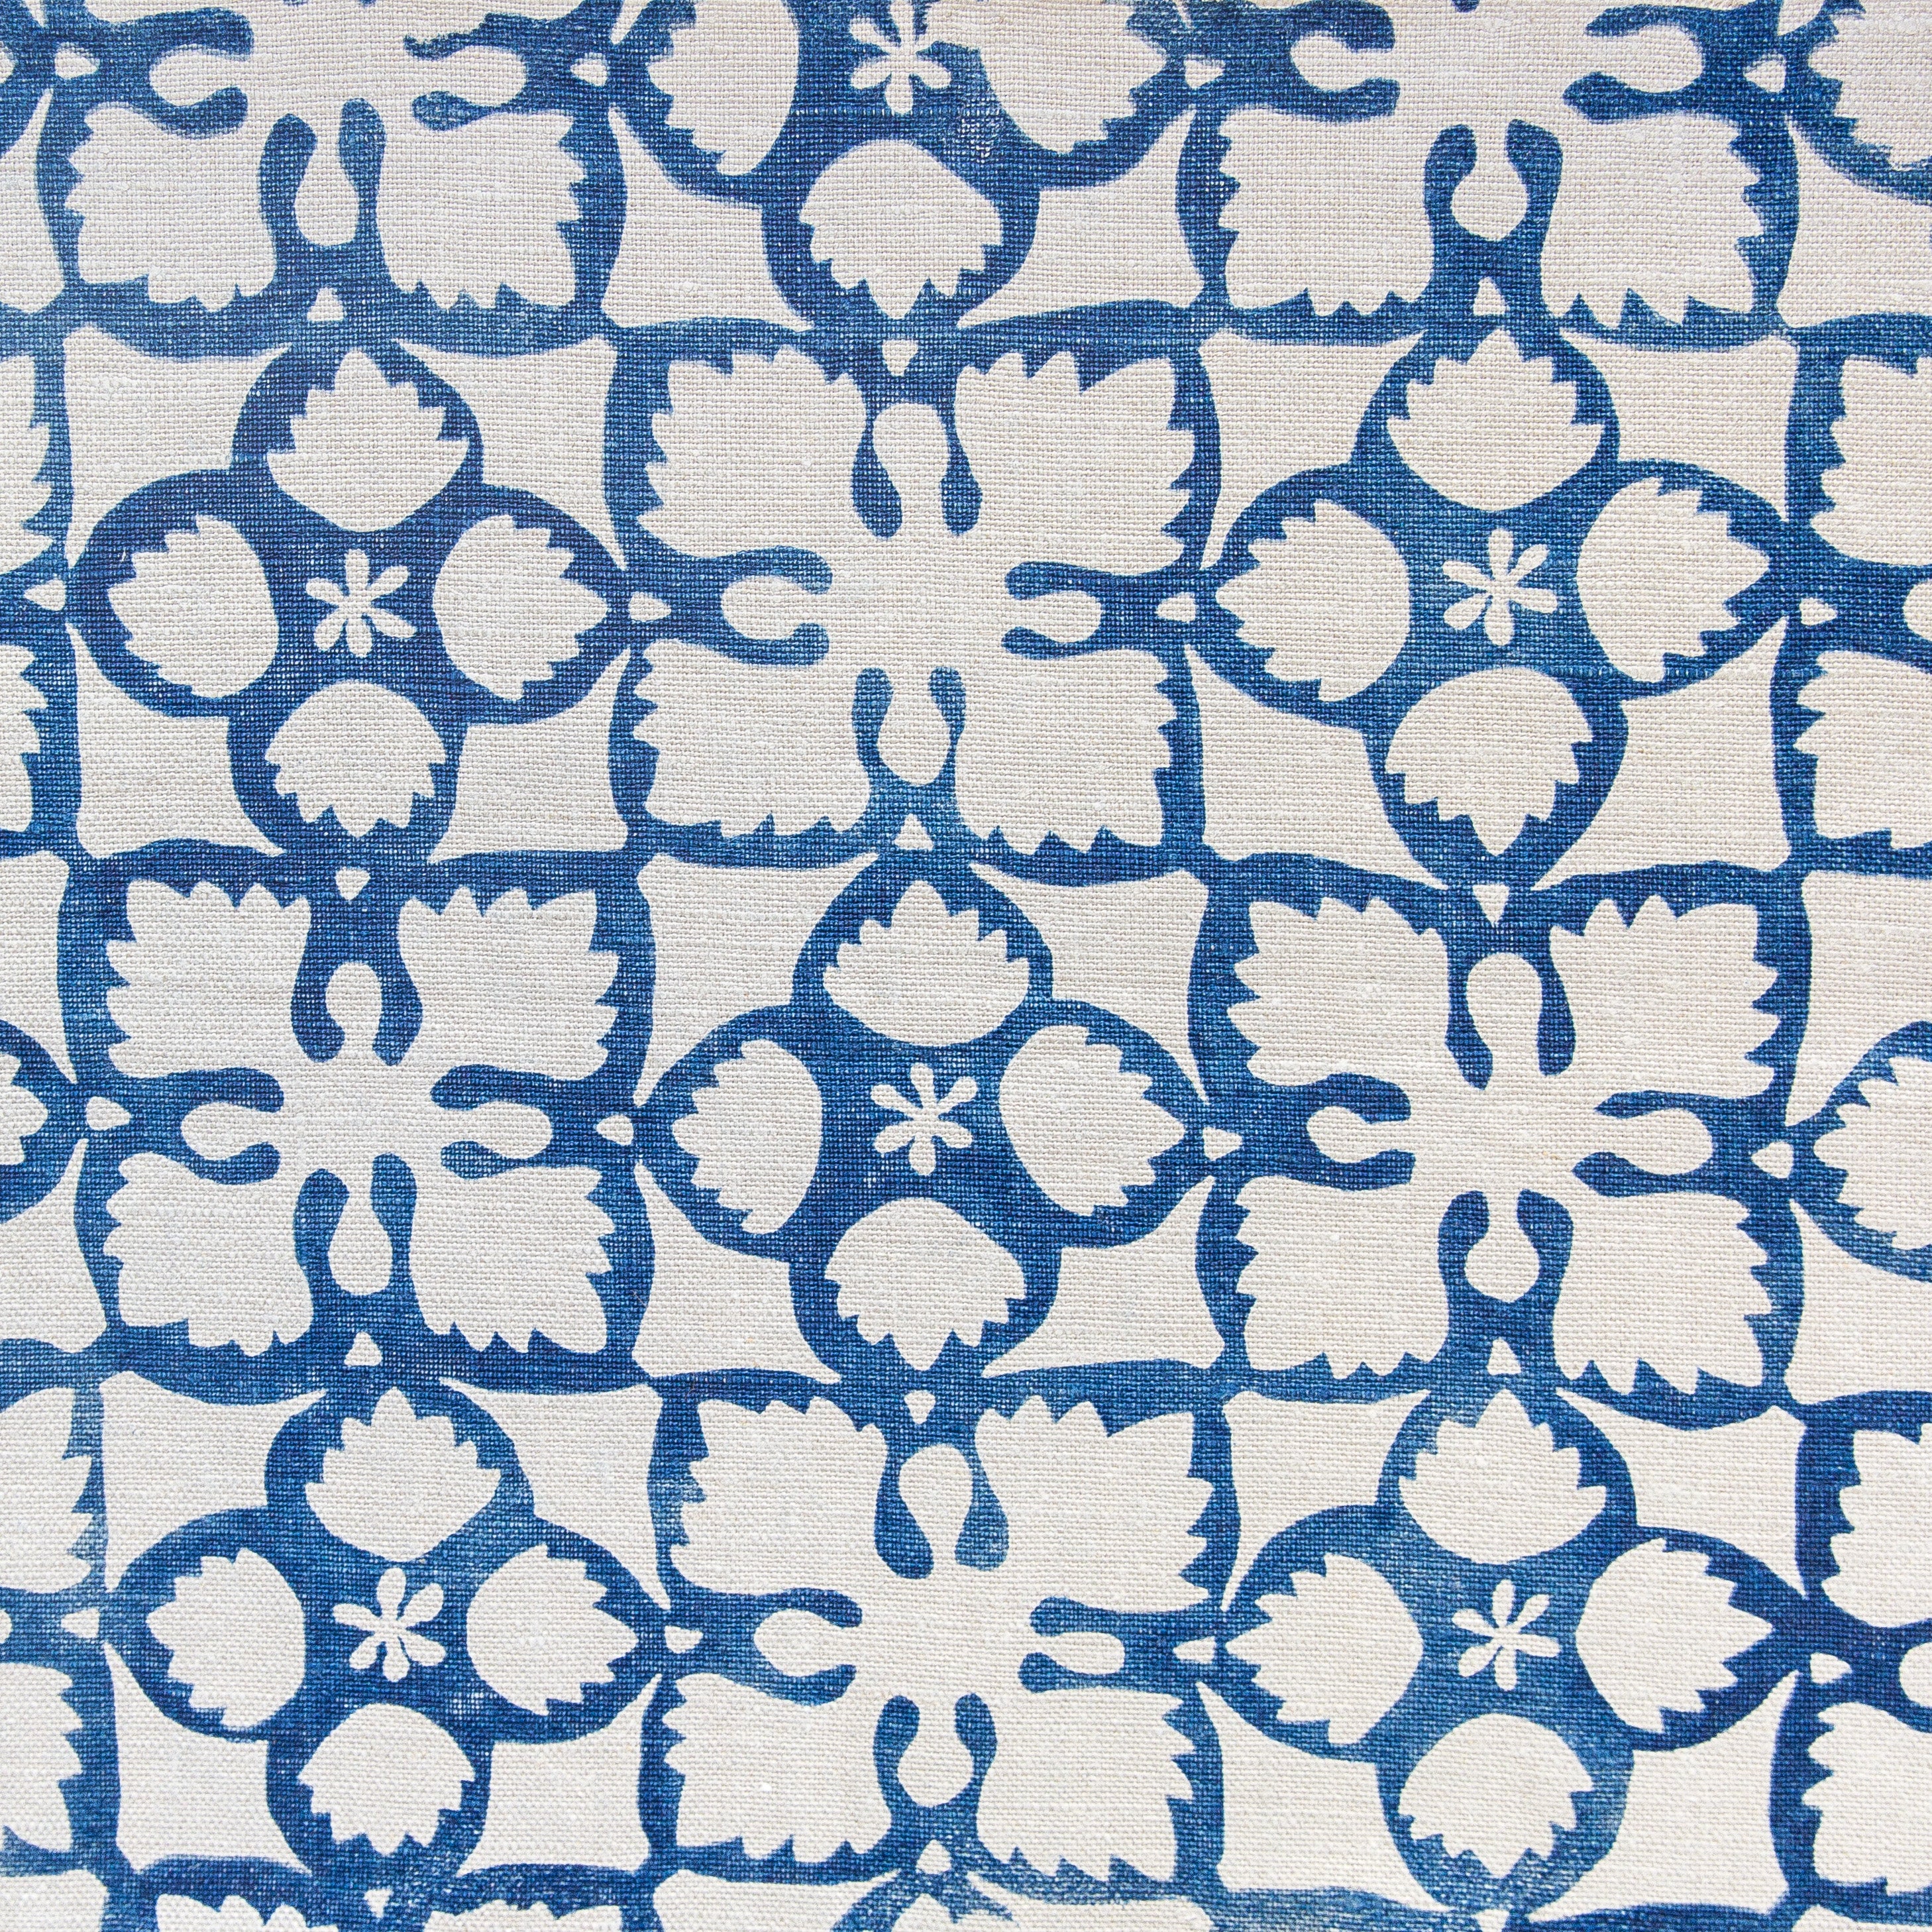 Detail of fabric in a botanical lattice print in navy on a cream field.